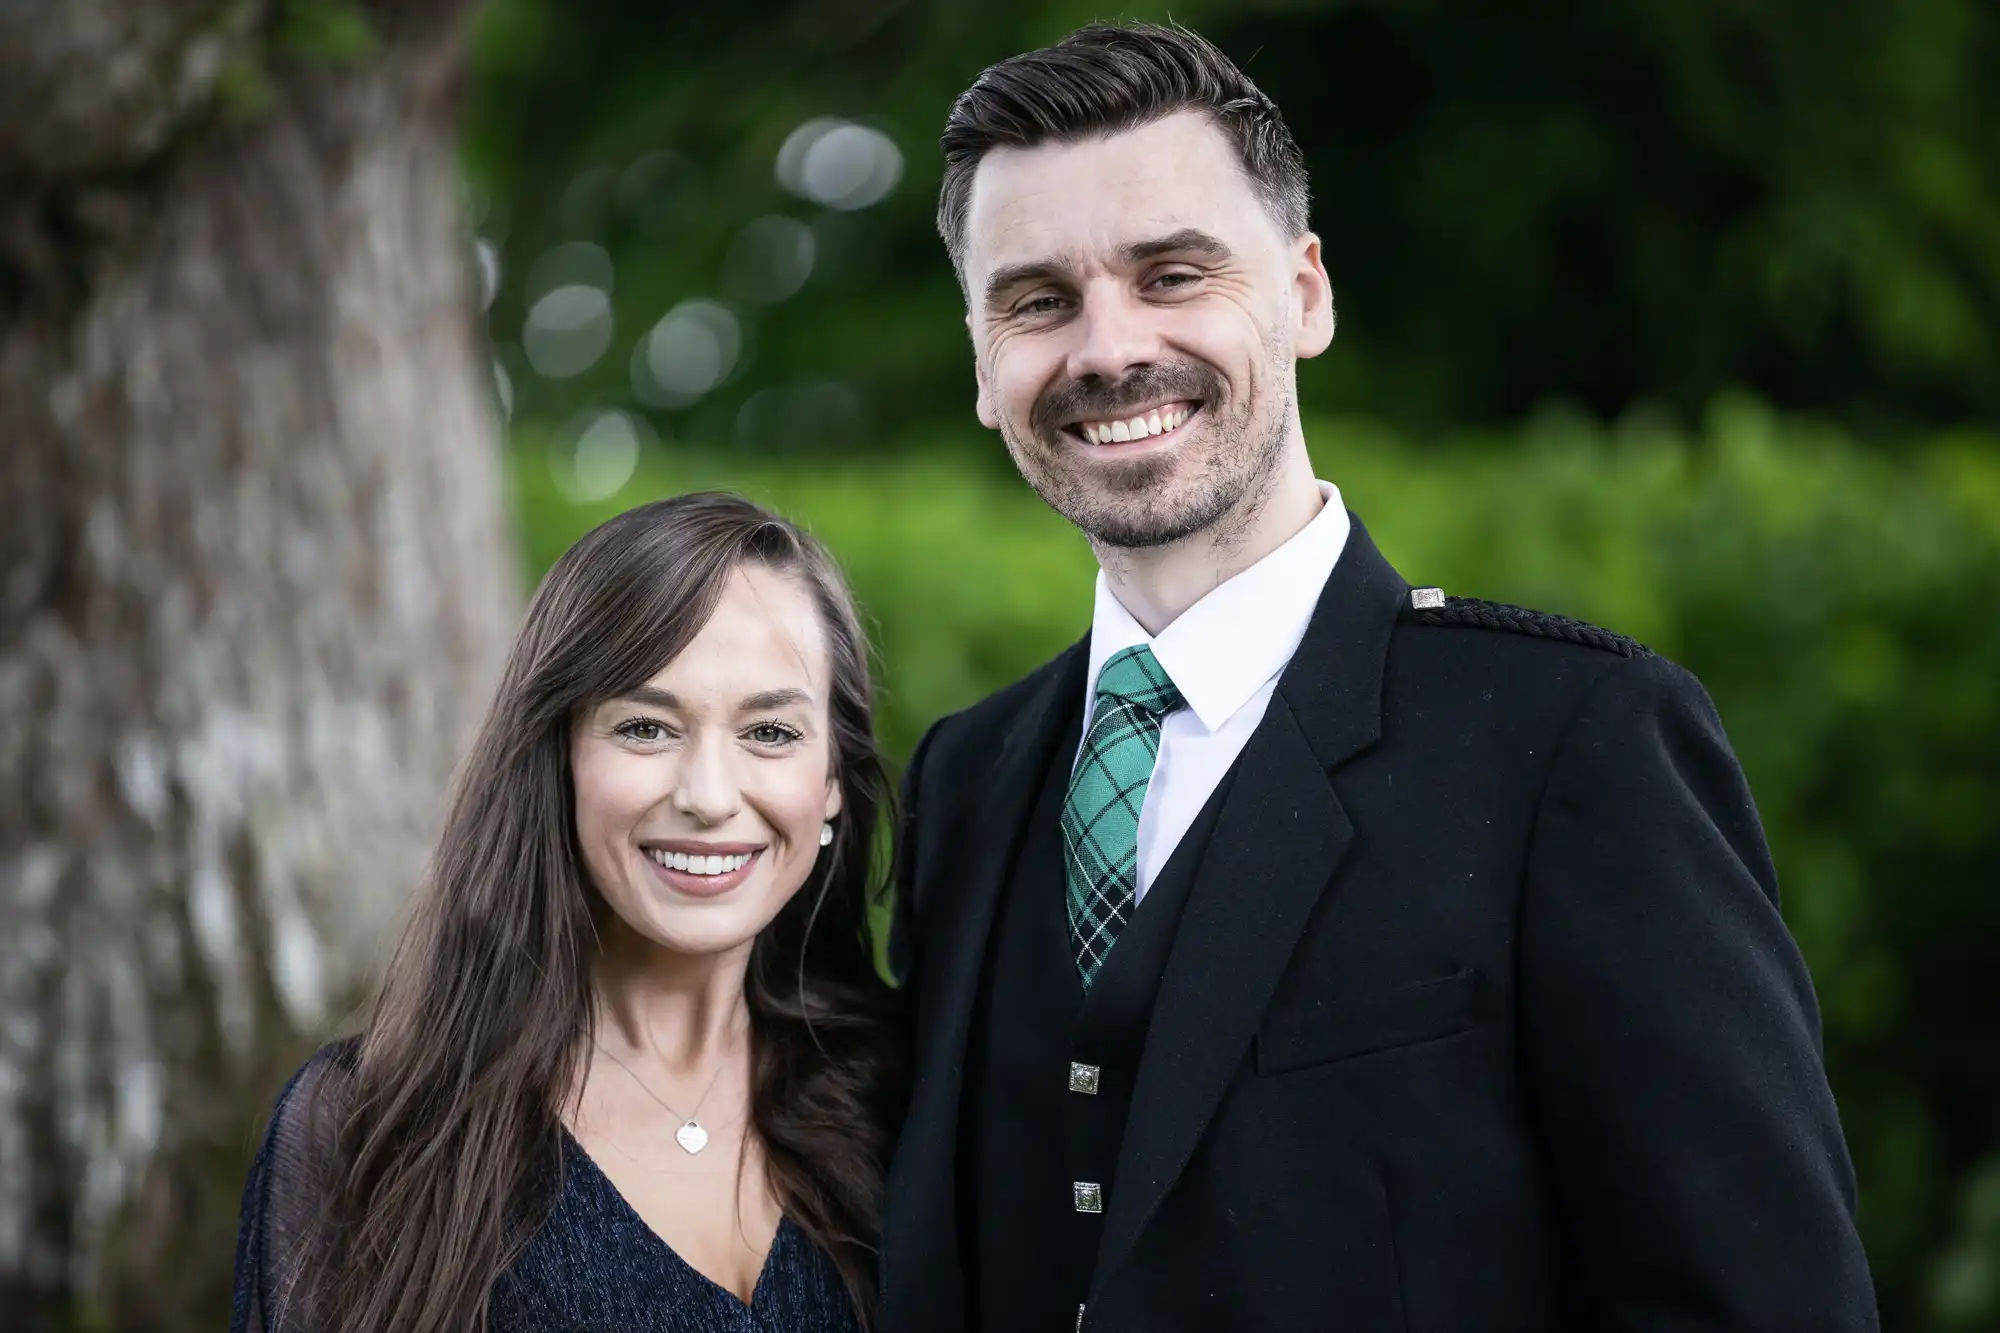 A smiling couple posing outdoors, the man wearing a kilt and the woman in a dark dress, with a lush green background.